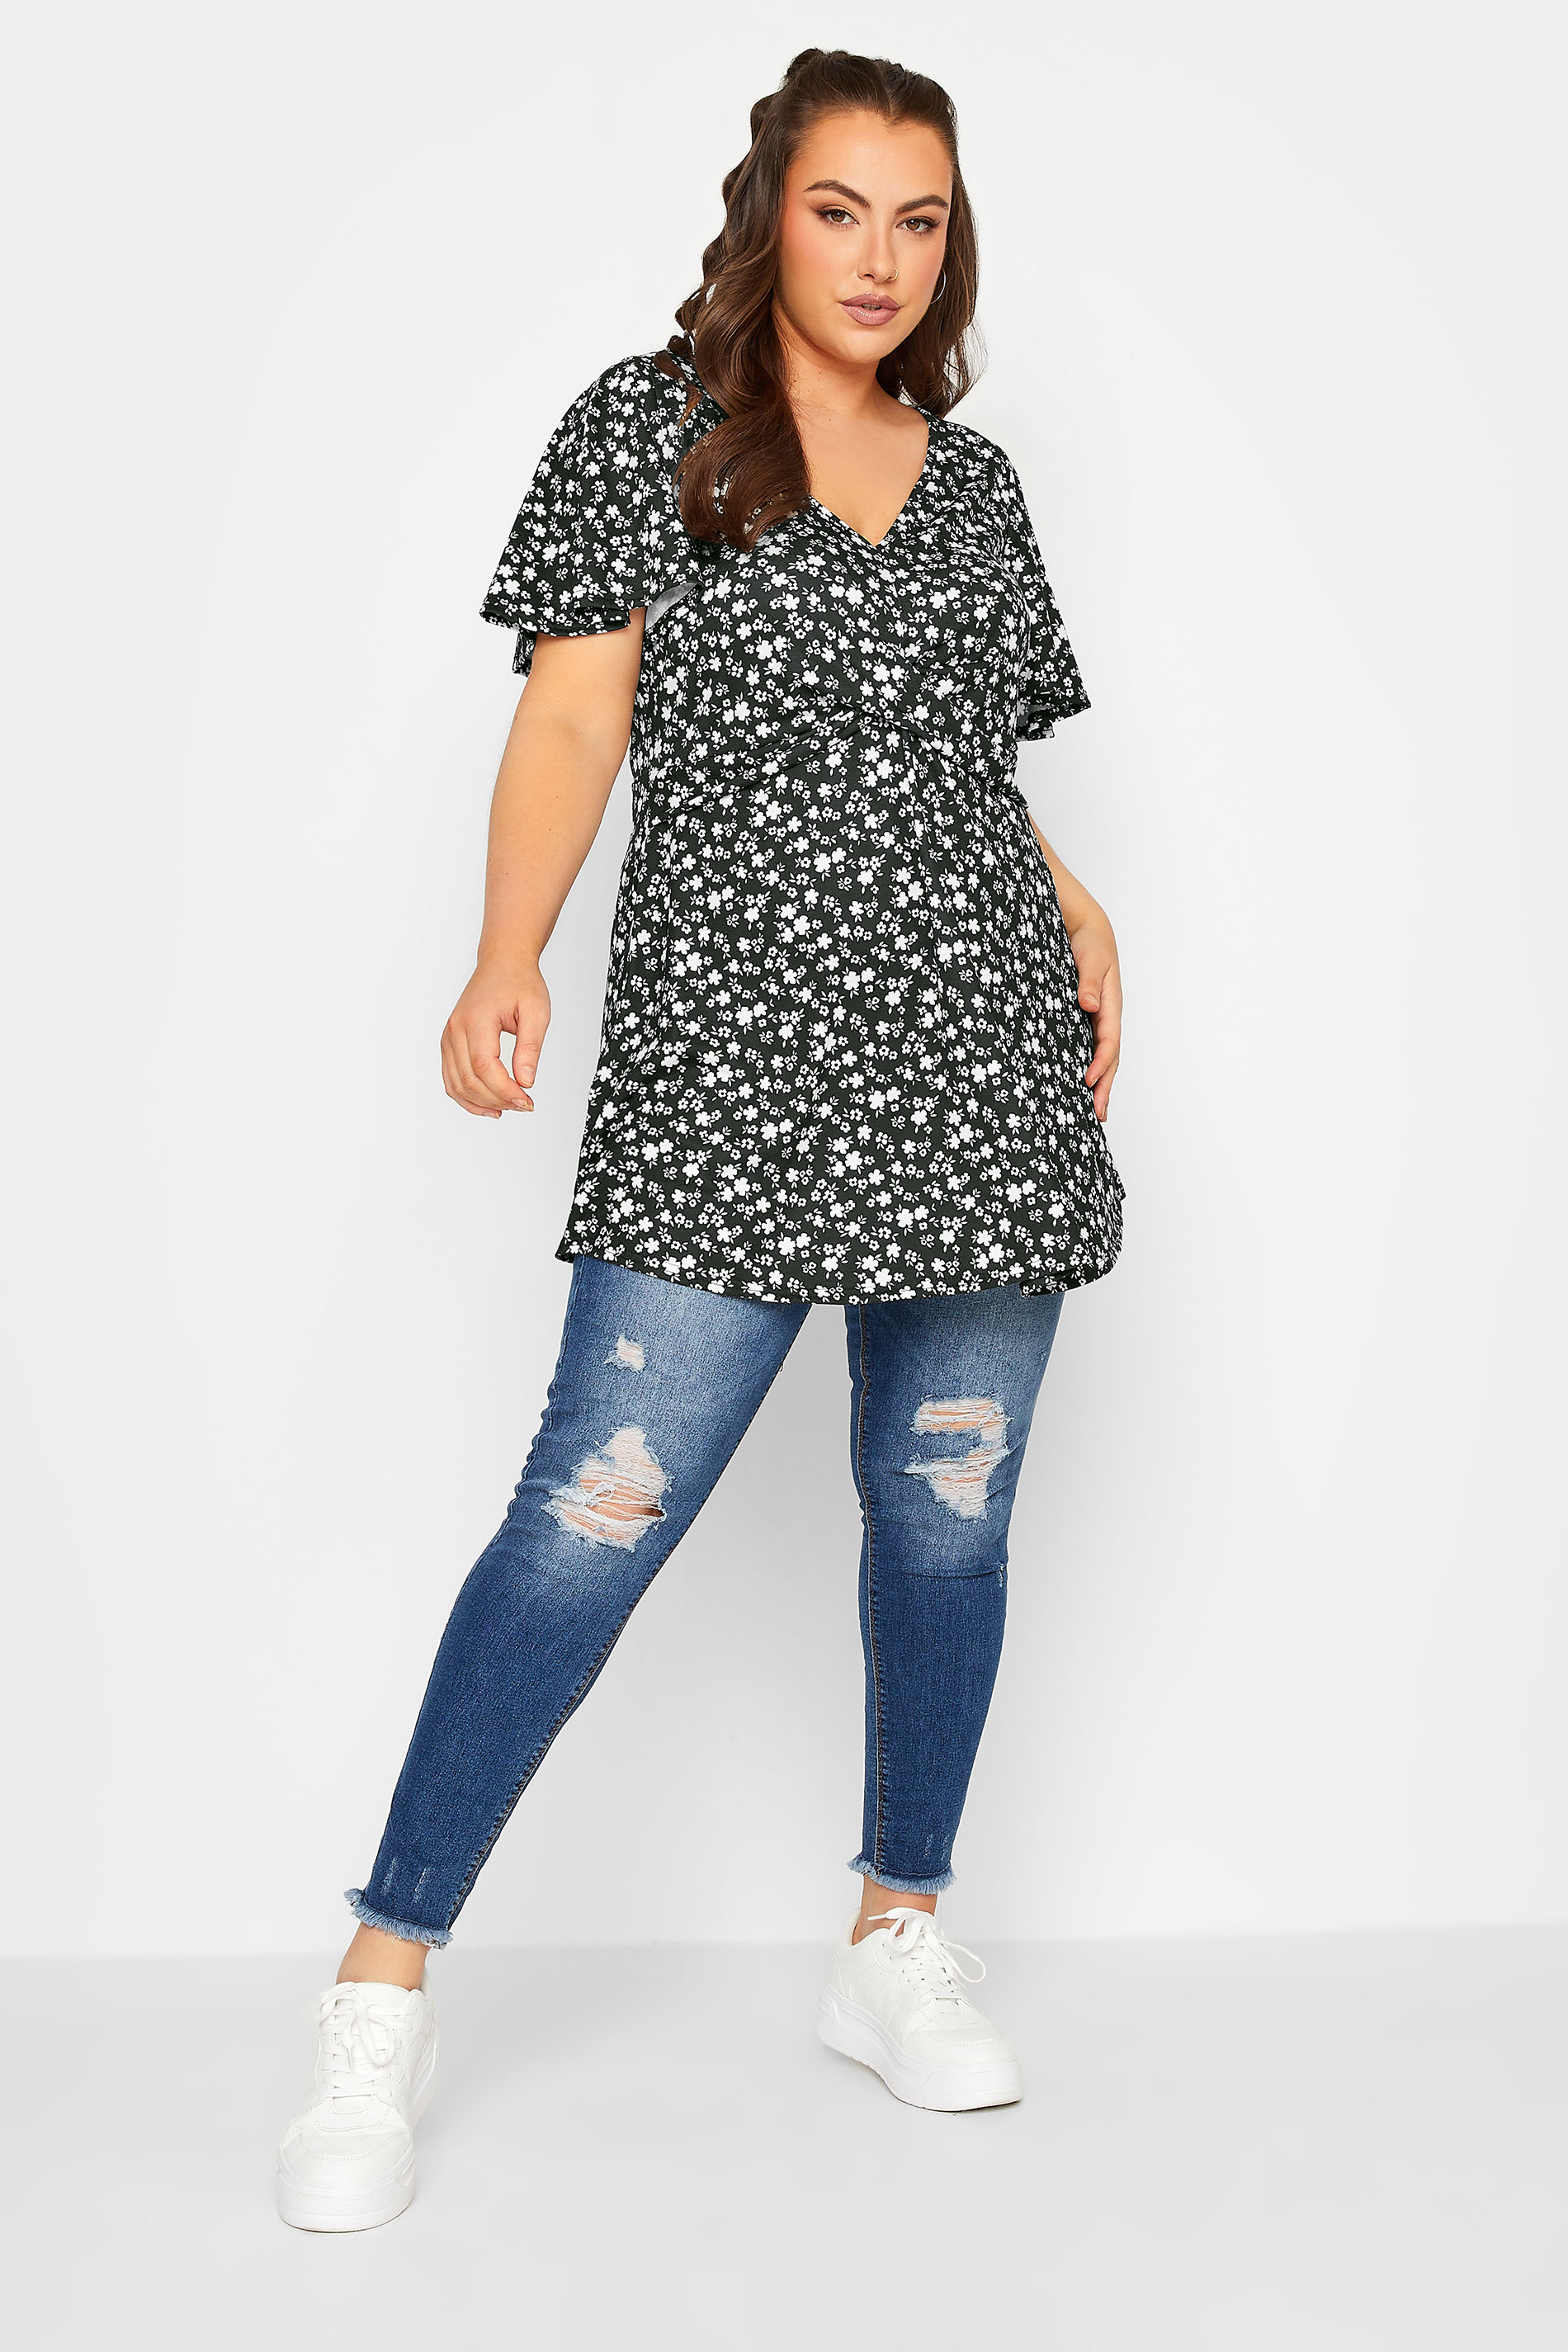 YOURS Plus Size Black Ditsy Print Twist Front Top | Yours Clothing 2